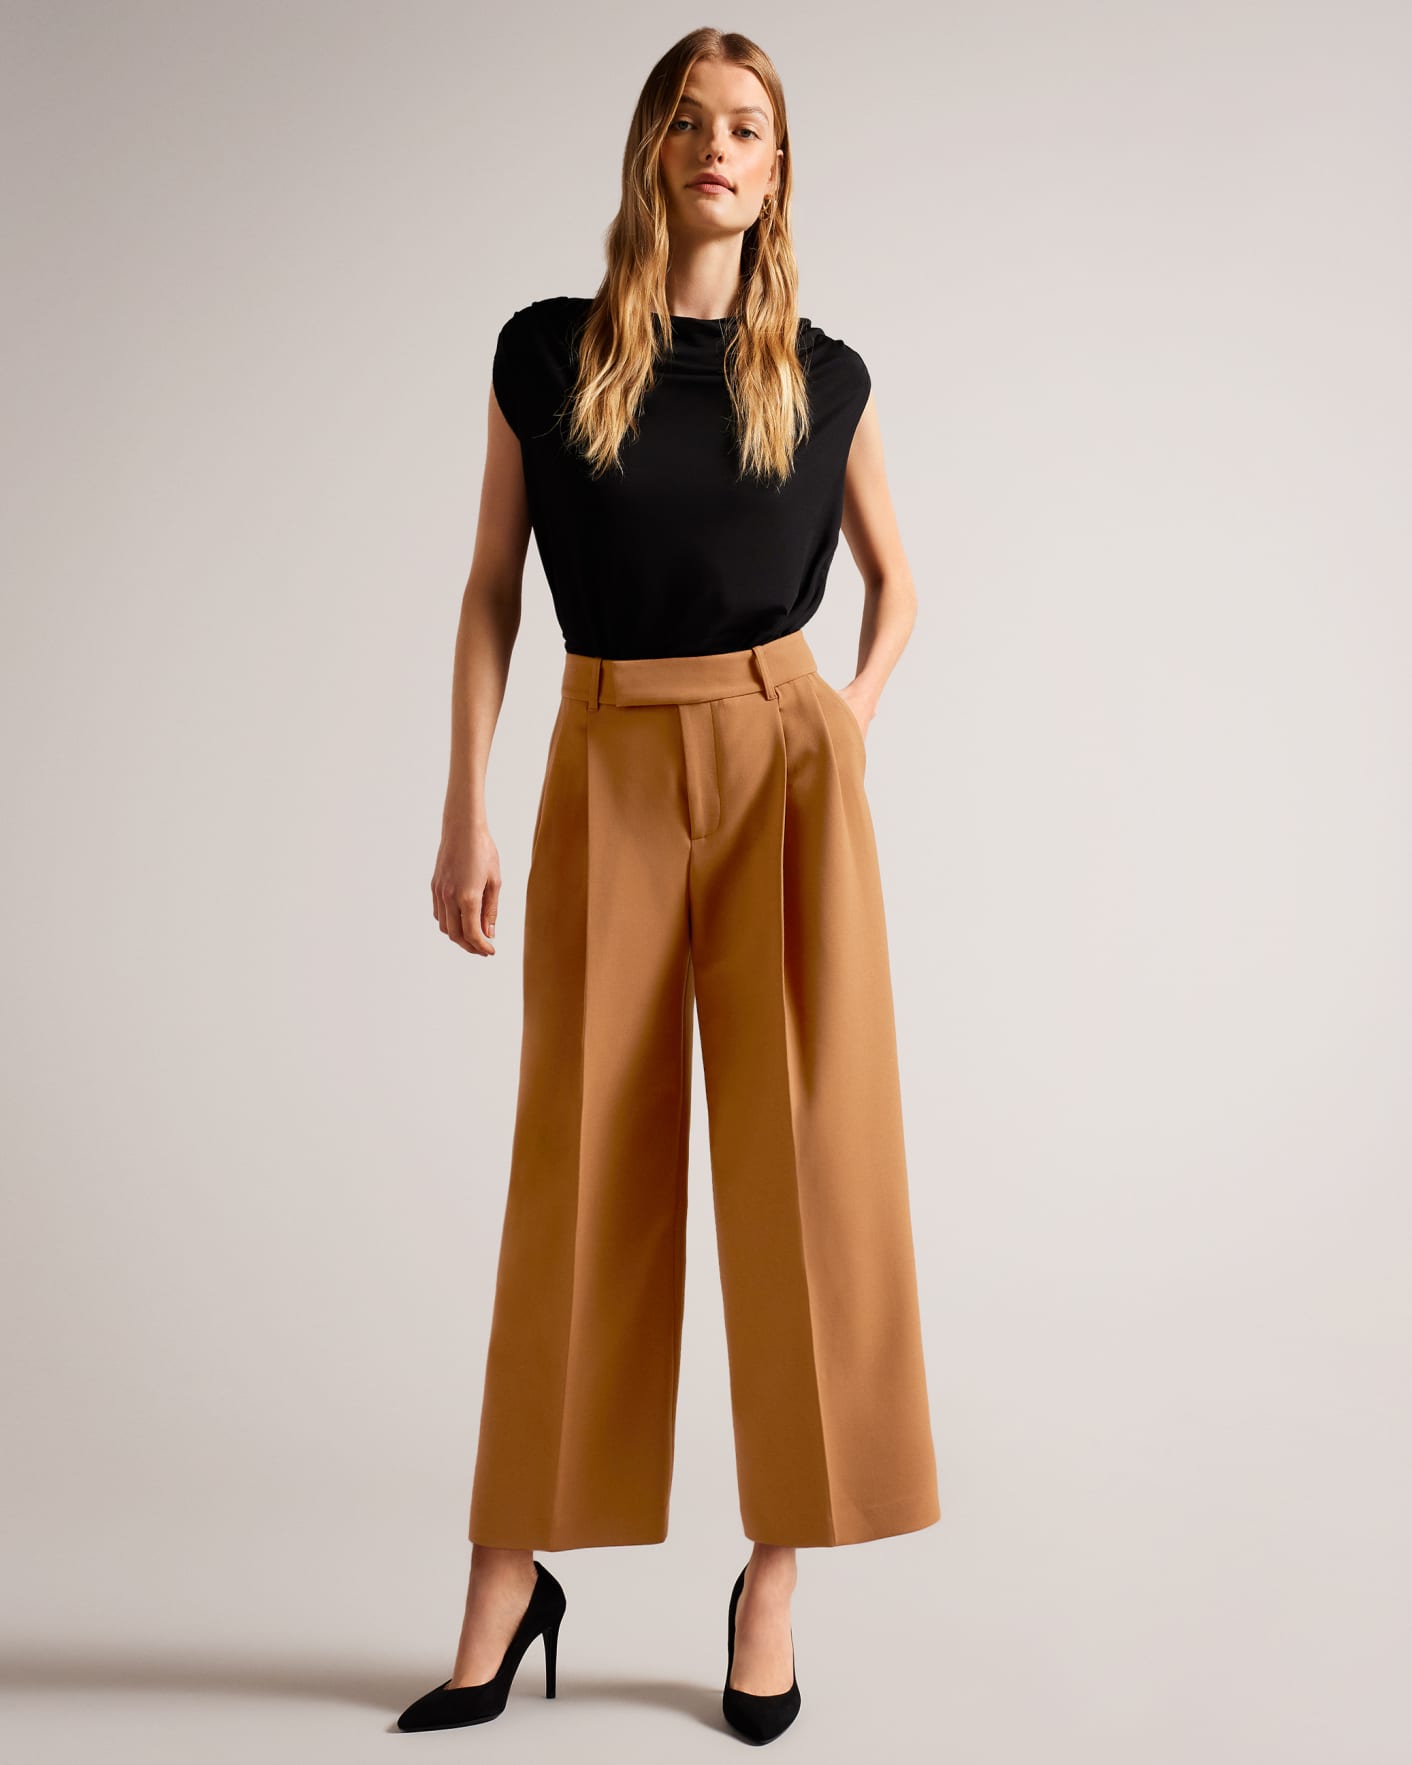 HALLEIS - CAMEL, Trousers & Shorts